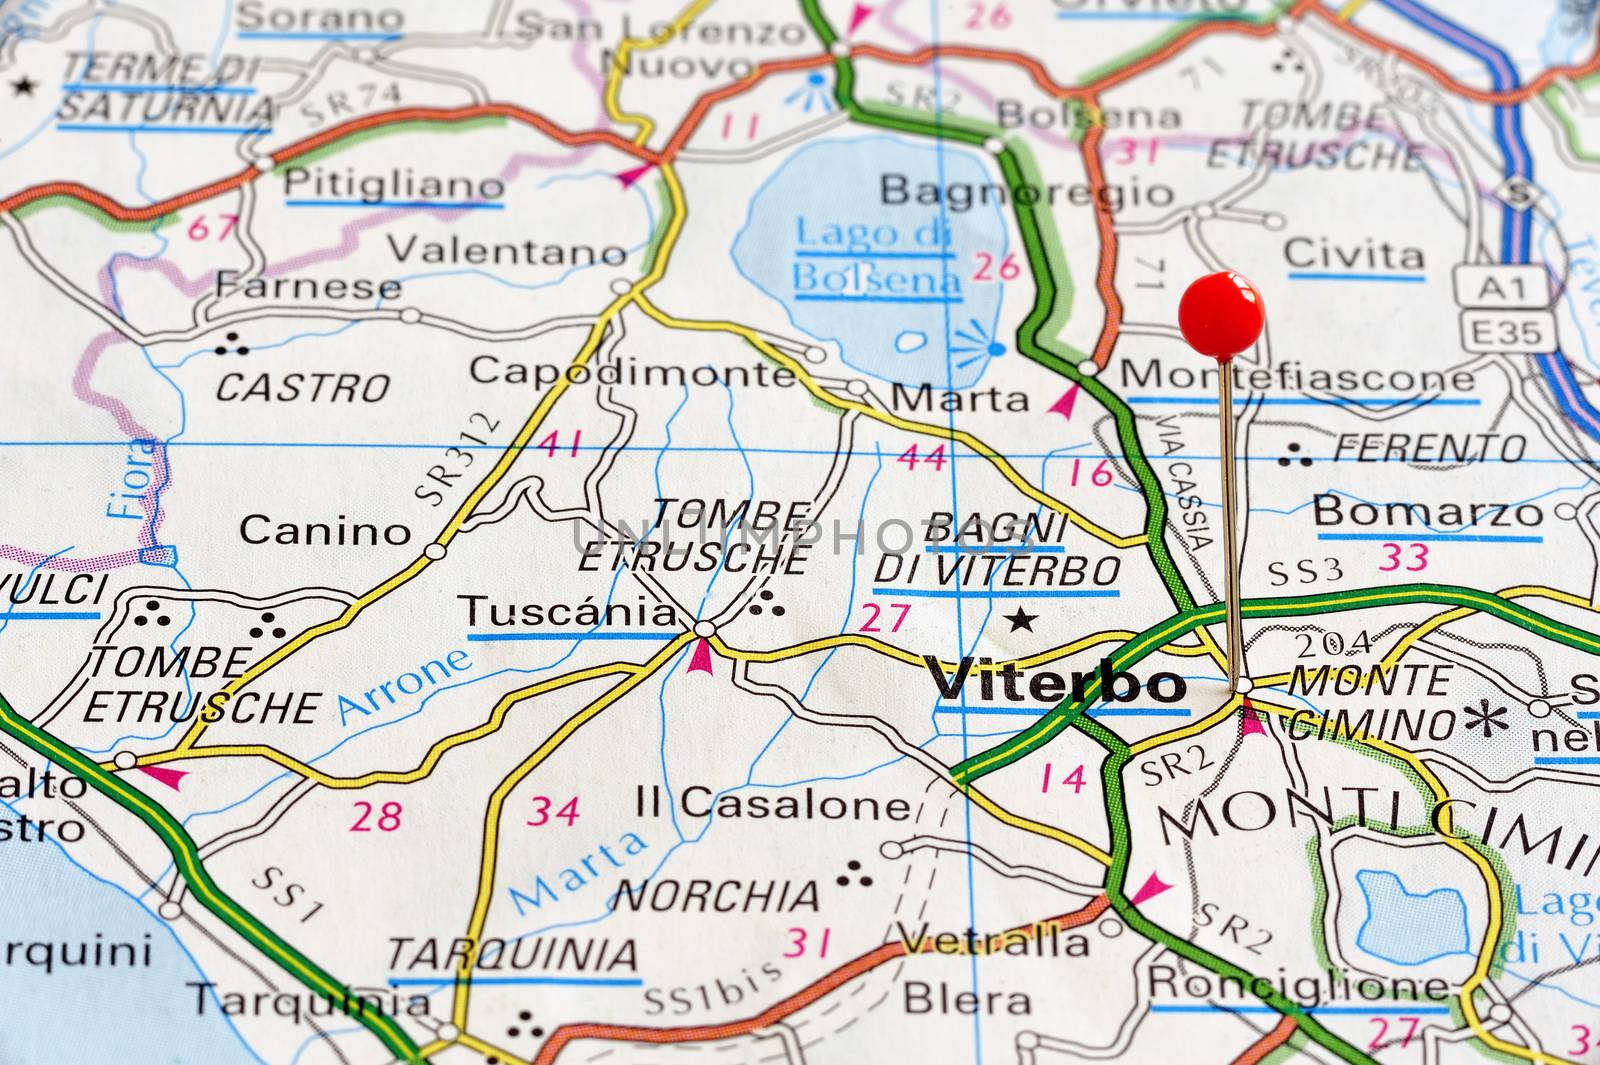 Closeup map of Viterbo. Viterbo is a city in Italy. Picture is from "KAK BILATLAS Europa" 5th edition, ISBN 9147801166, created 2012-02-22.